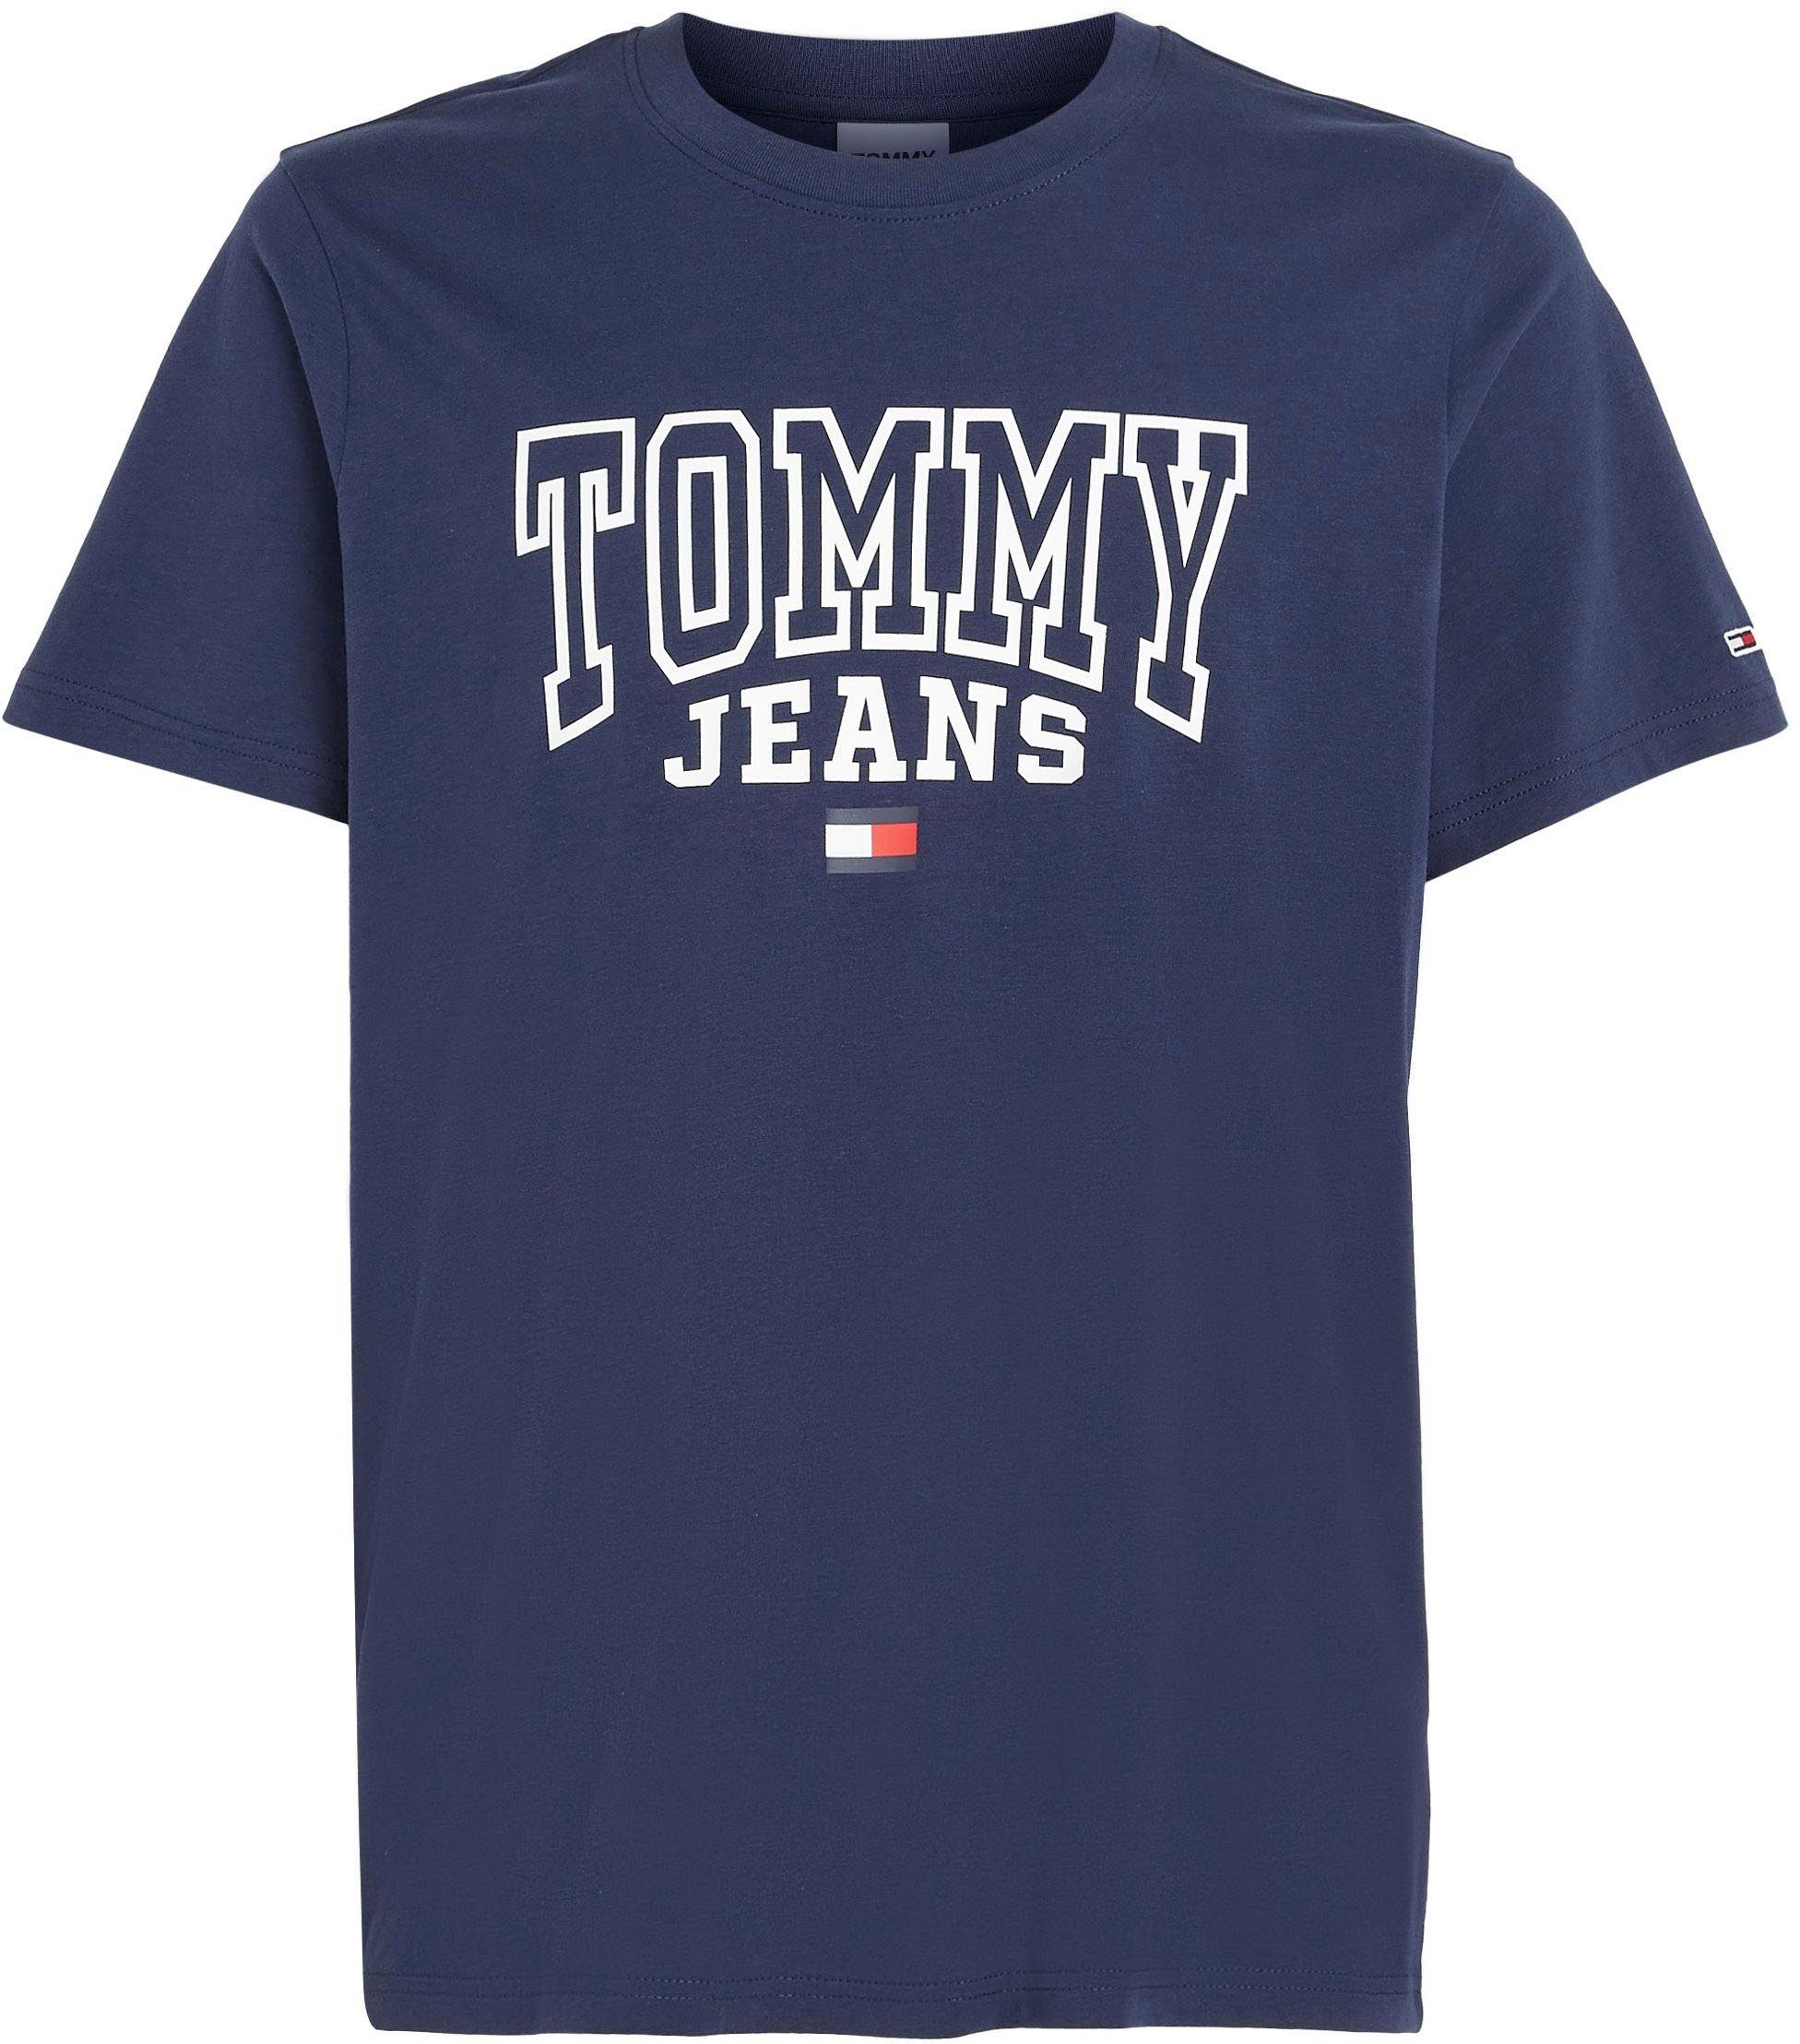 Twilight Navy T-Shirt ENTRY Tommy TJM RGLR Jeans TEE GRAPHIC